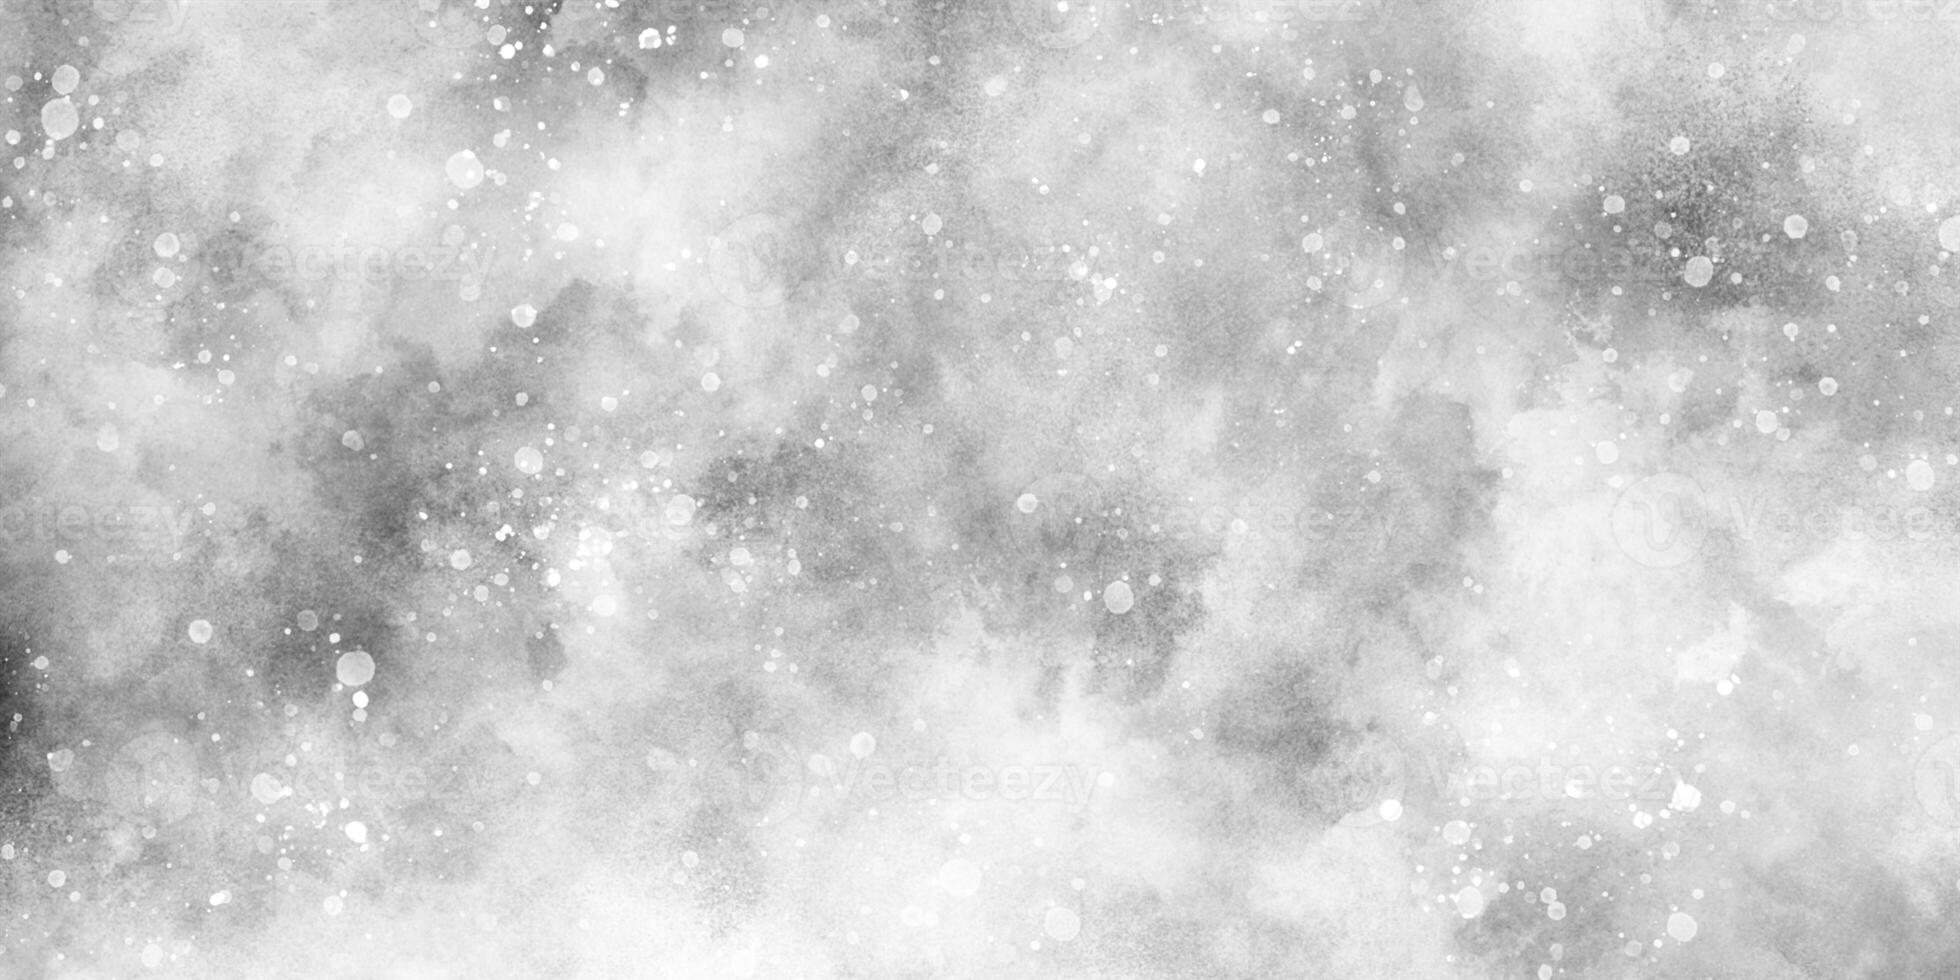 snow falling in the snow in the winter morning, sunshine or sparkling lights and glittering glow winter morning of snow falling background, abstract bokeh glitter background on blurred white. photo